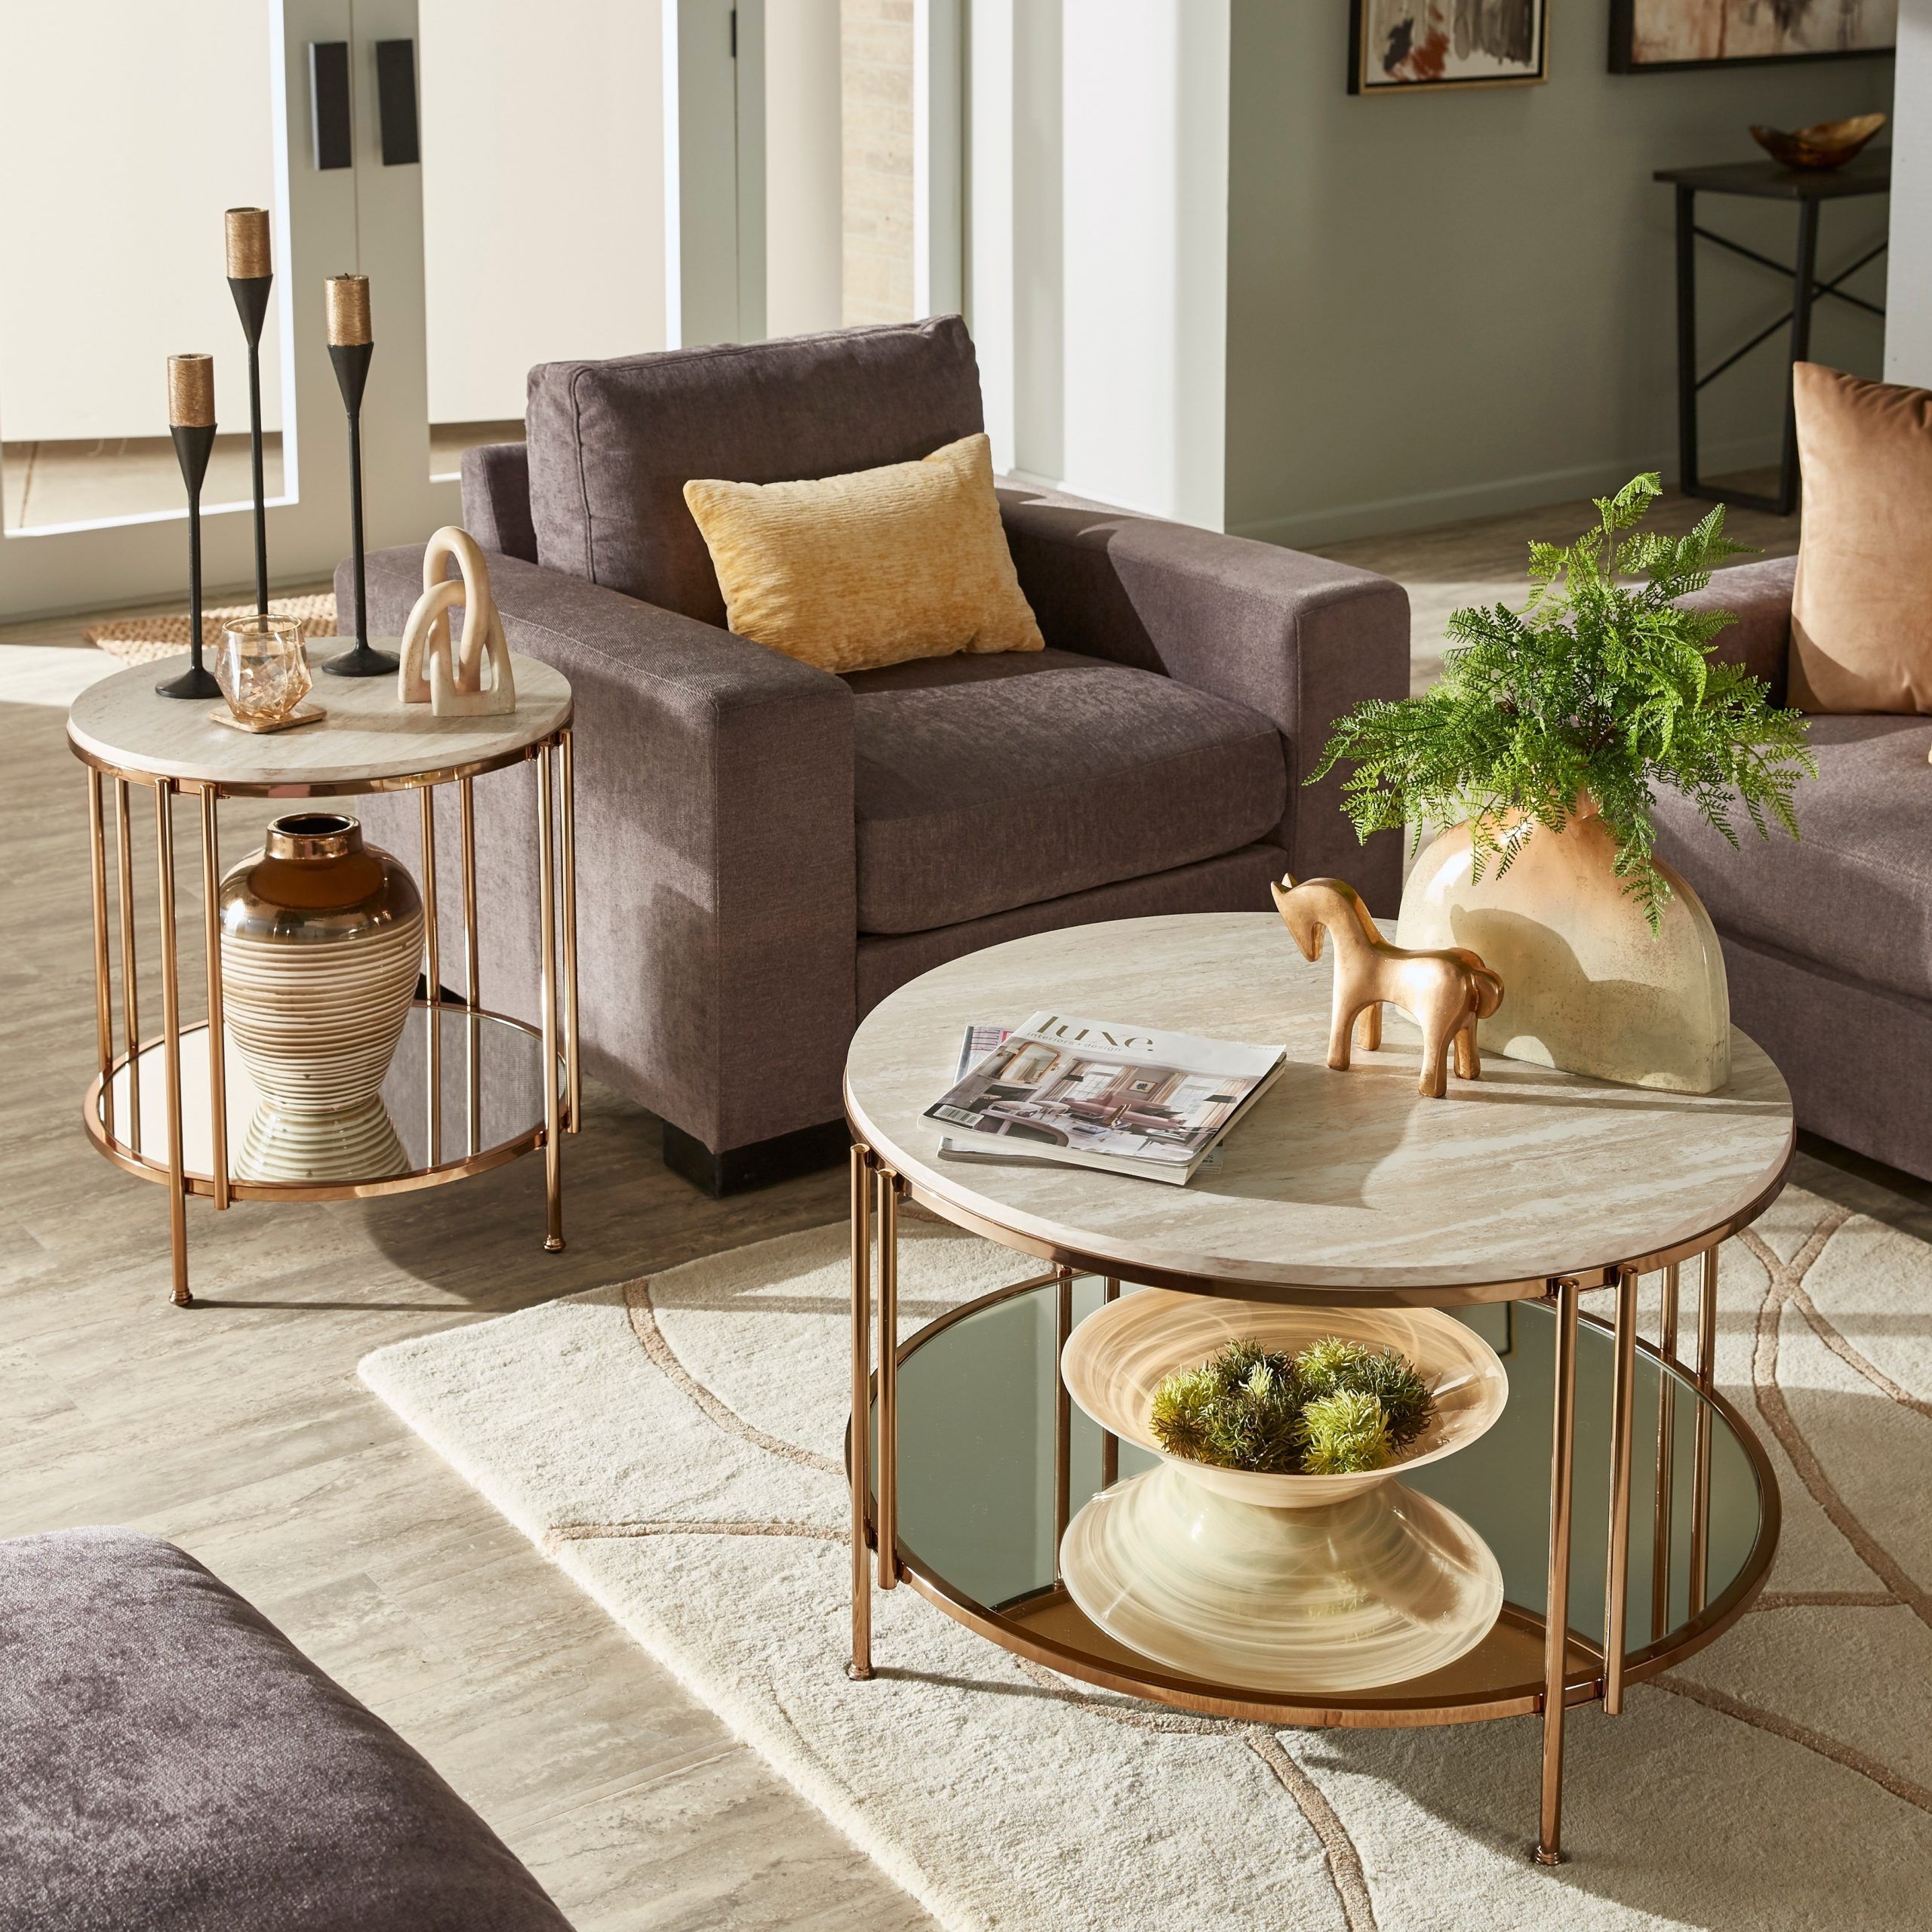 Celsus Champagne Gold Table Collection With Faux Marble Topinspire Q  Bold – On Sale – Overstock – 27883704 With Faux Marble Gold Coffee Tables (View 11 of 20)